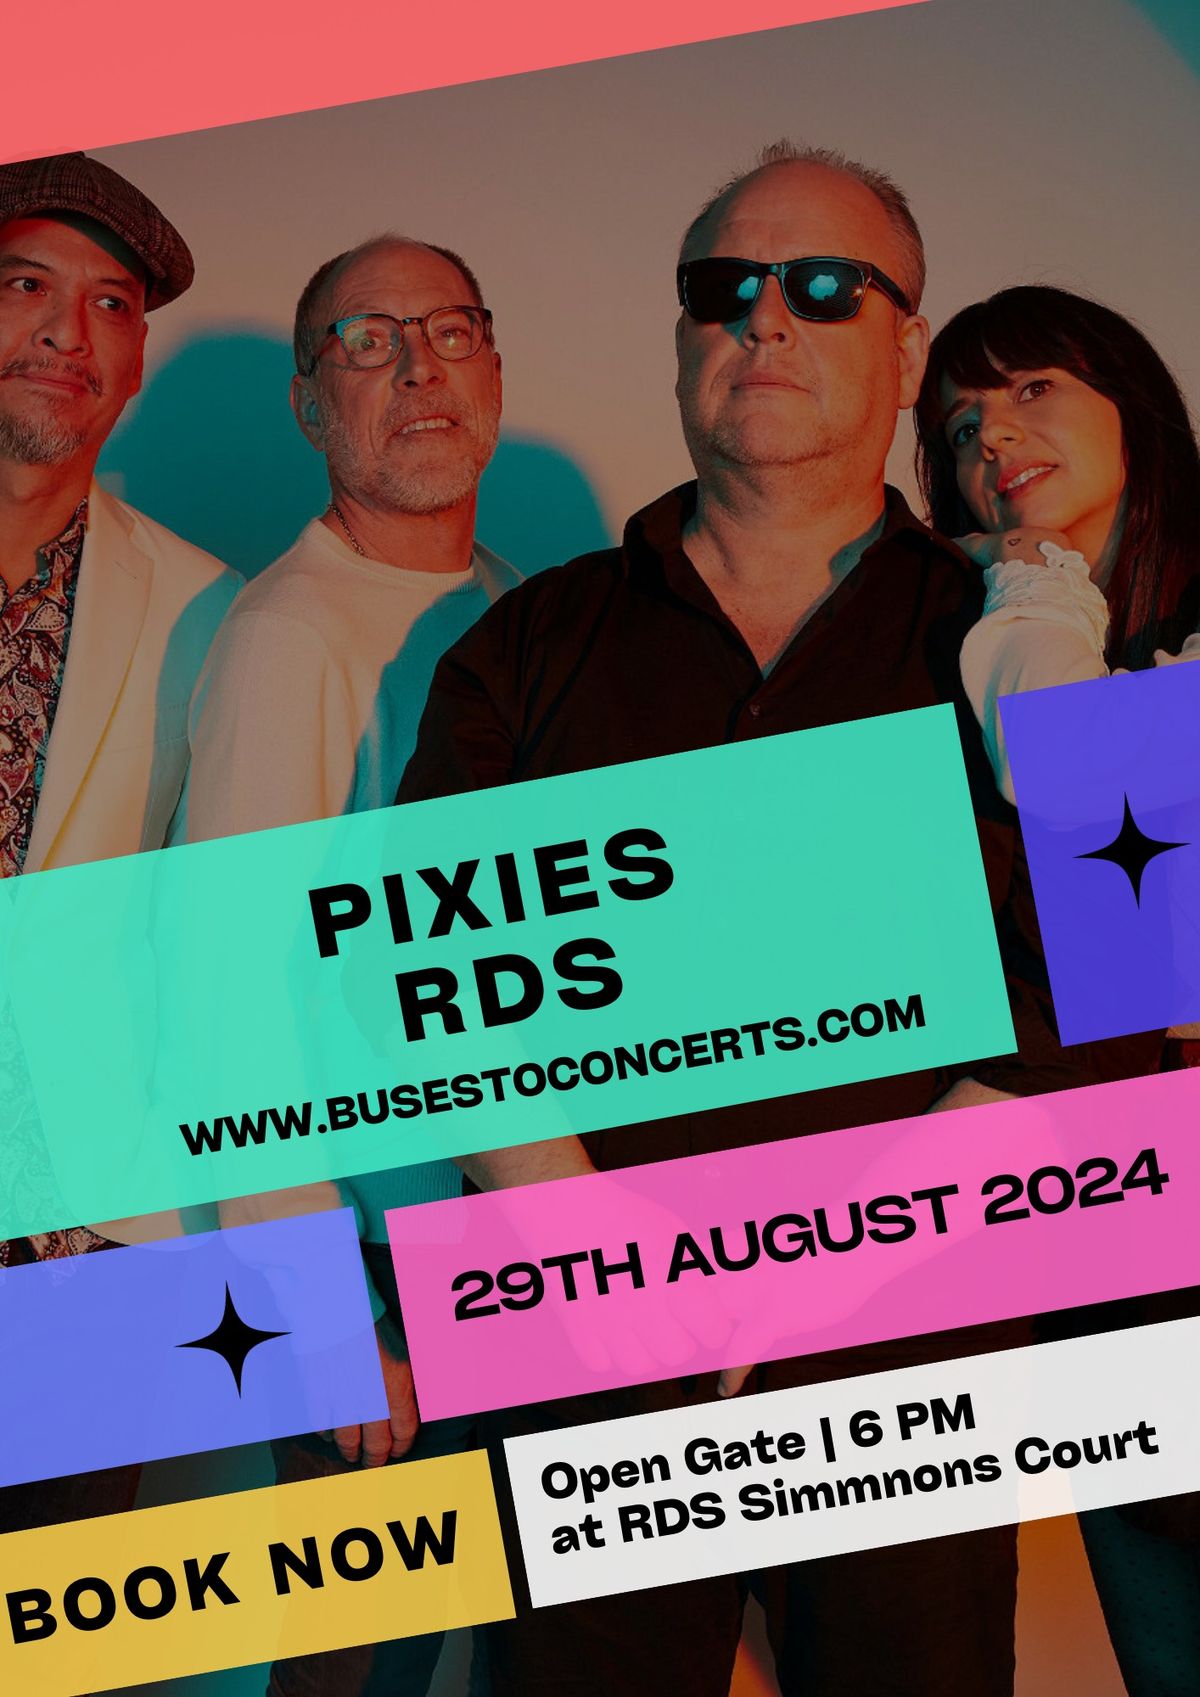 PIXIES - RDS ARENA - 29TH AUGUST 2024.